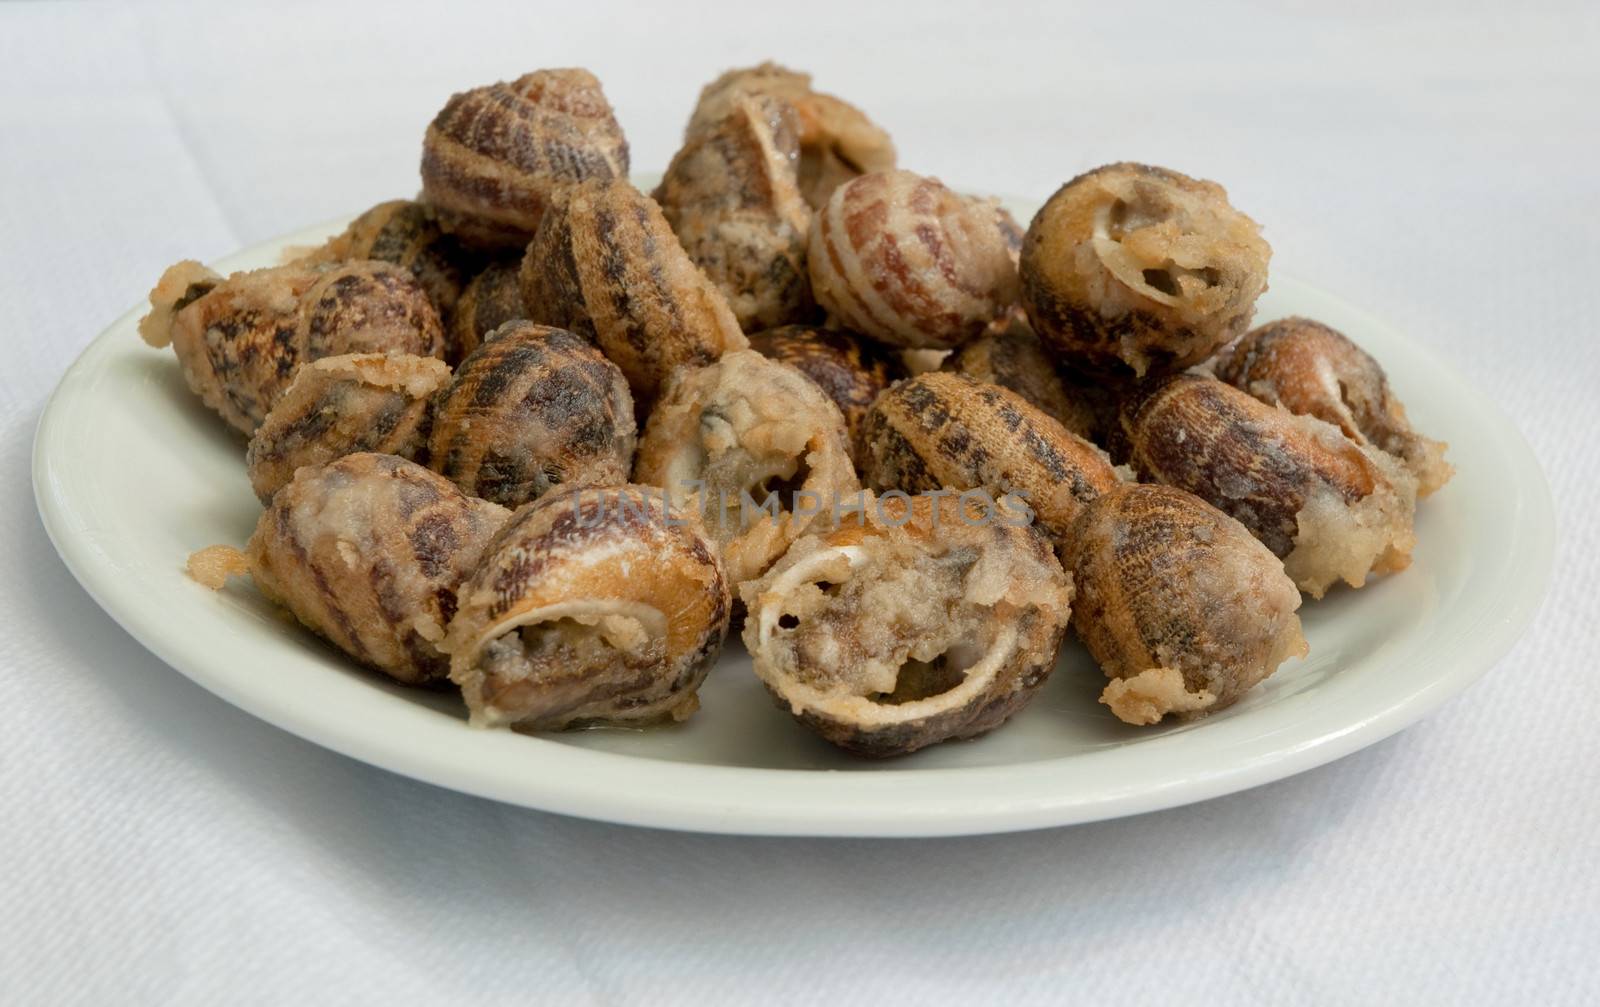 Fried snail on a white plate.